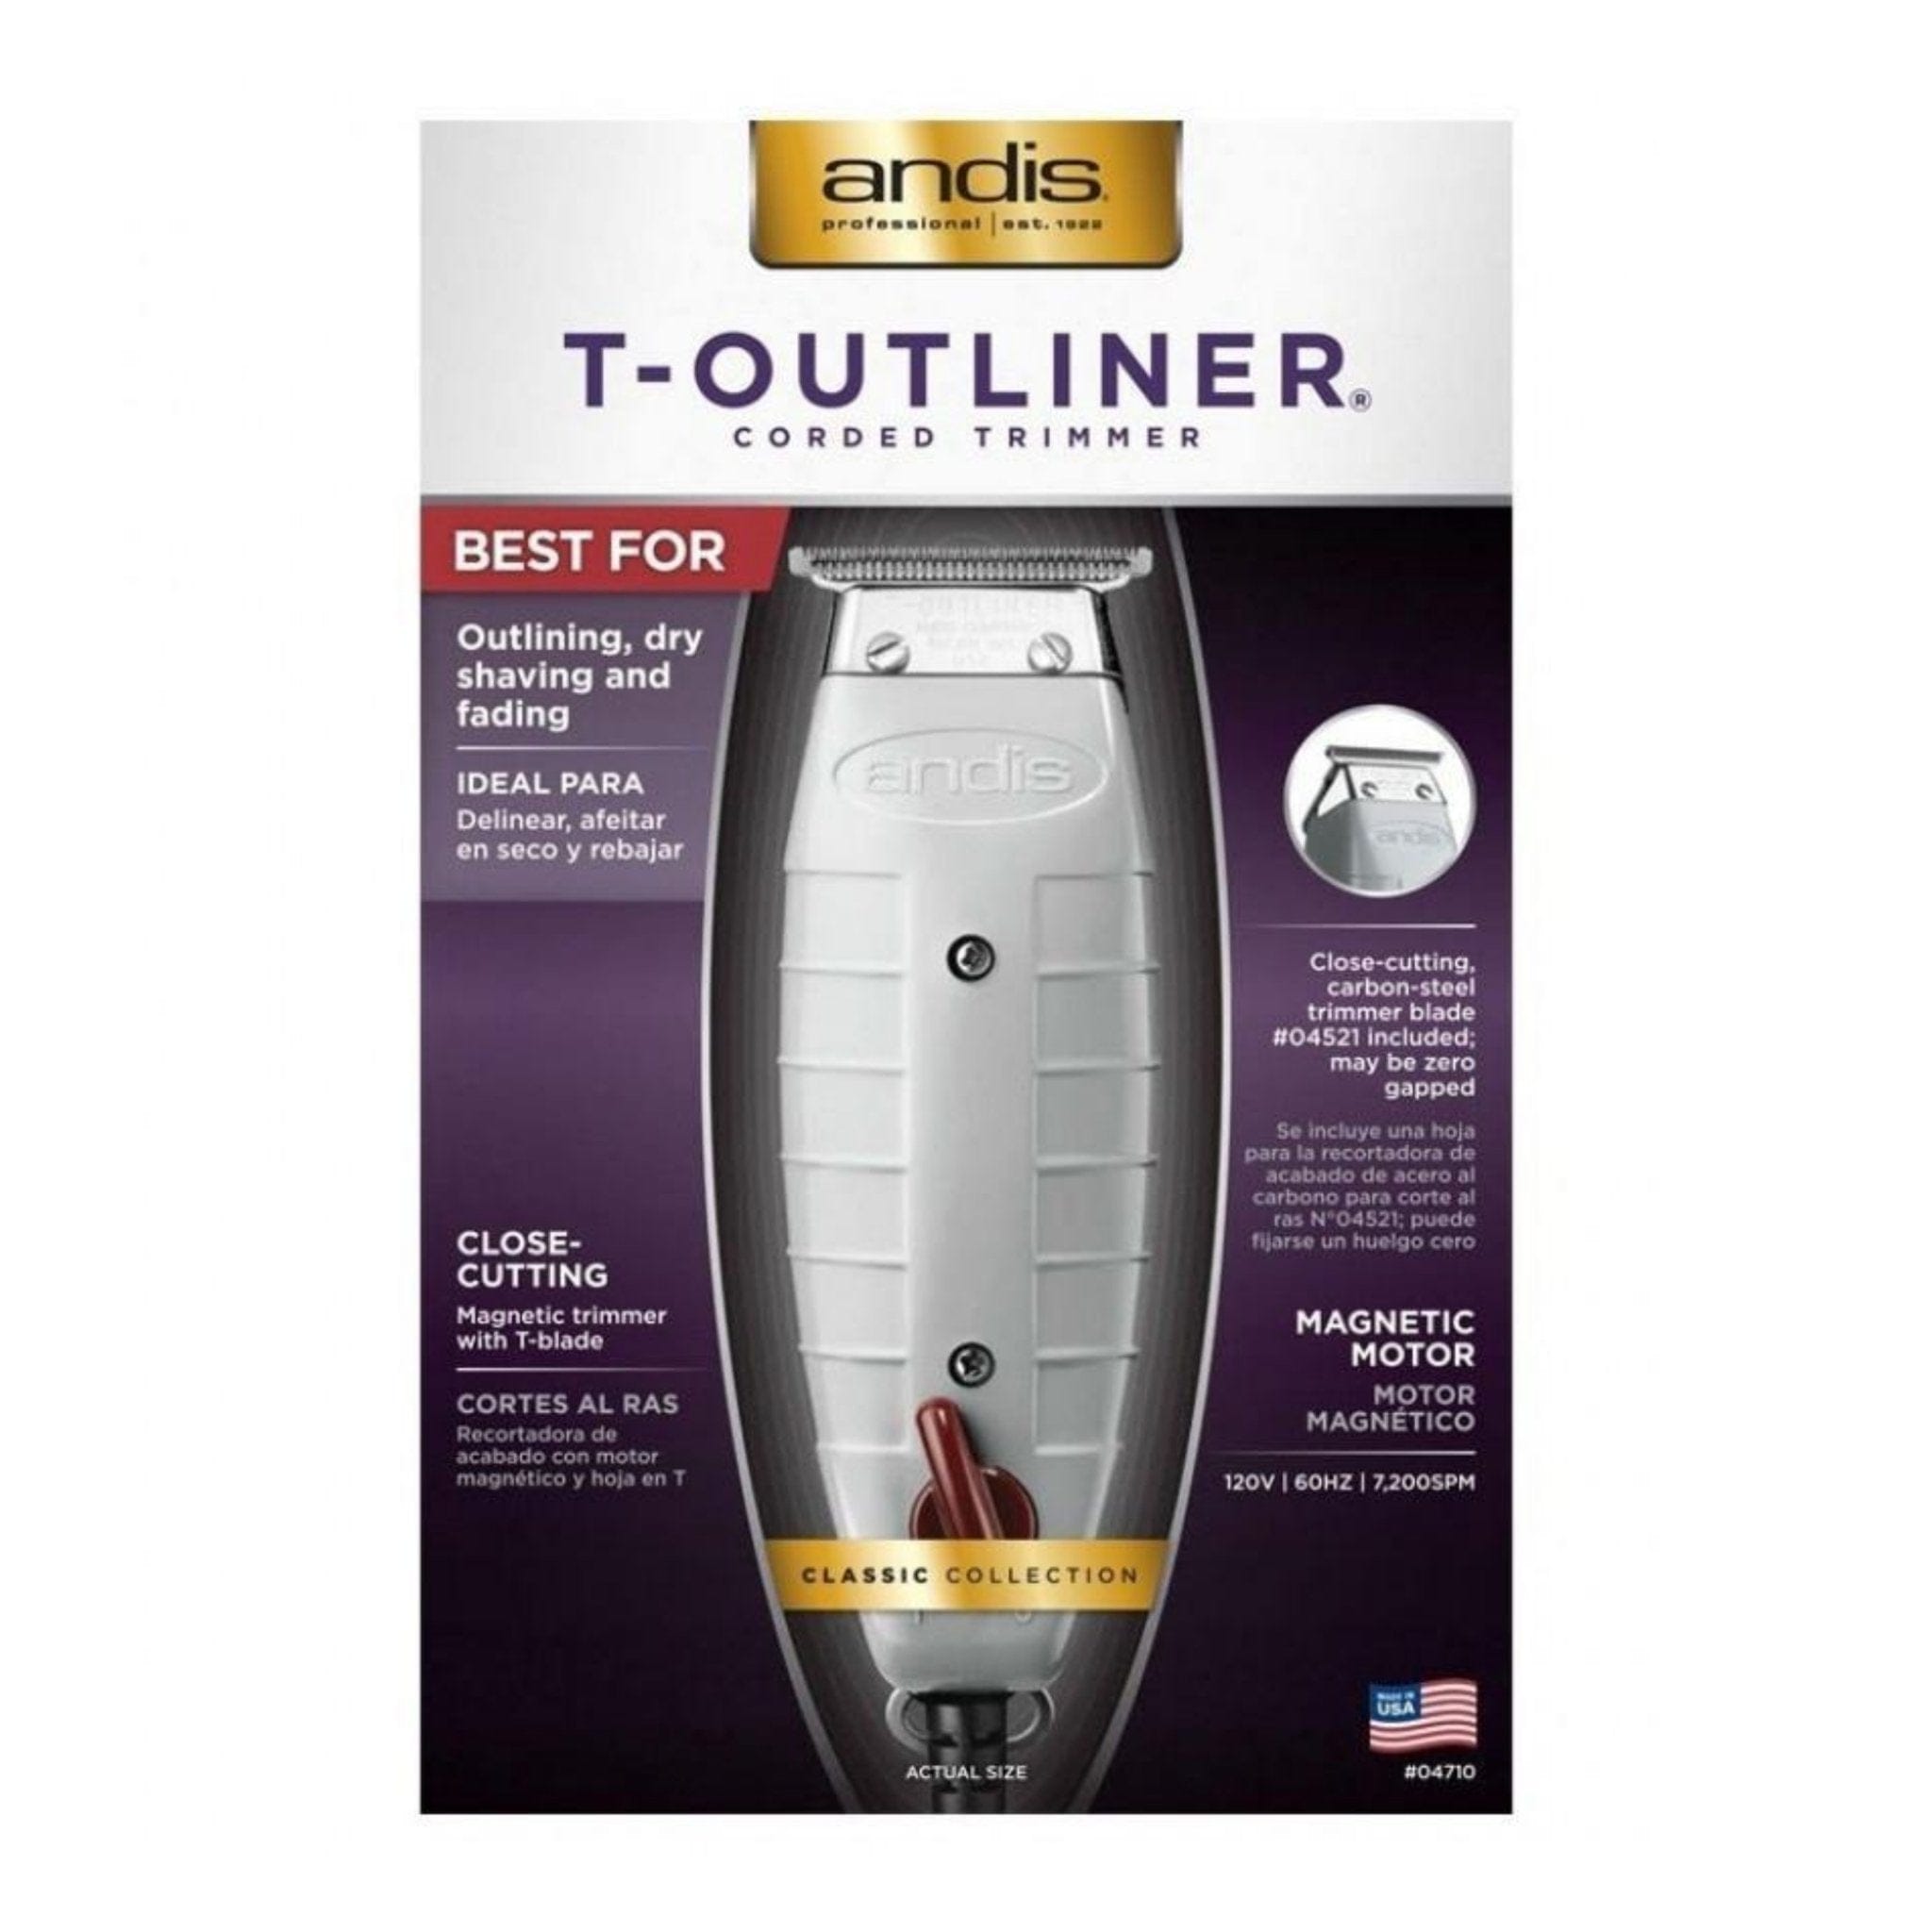 Andis T-Outliner Corded Trimmer.